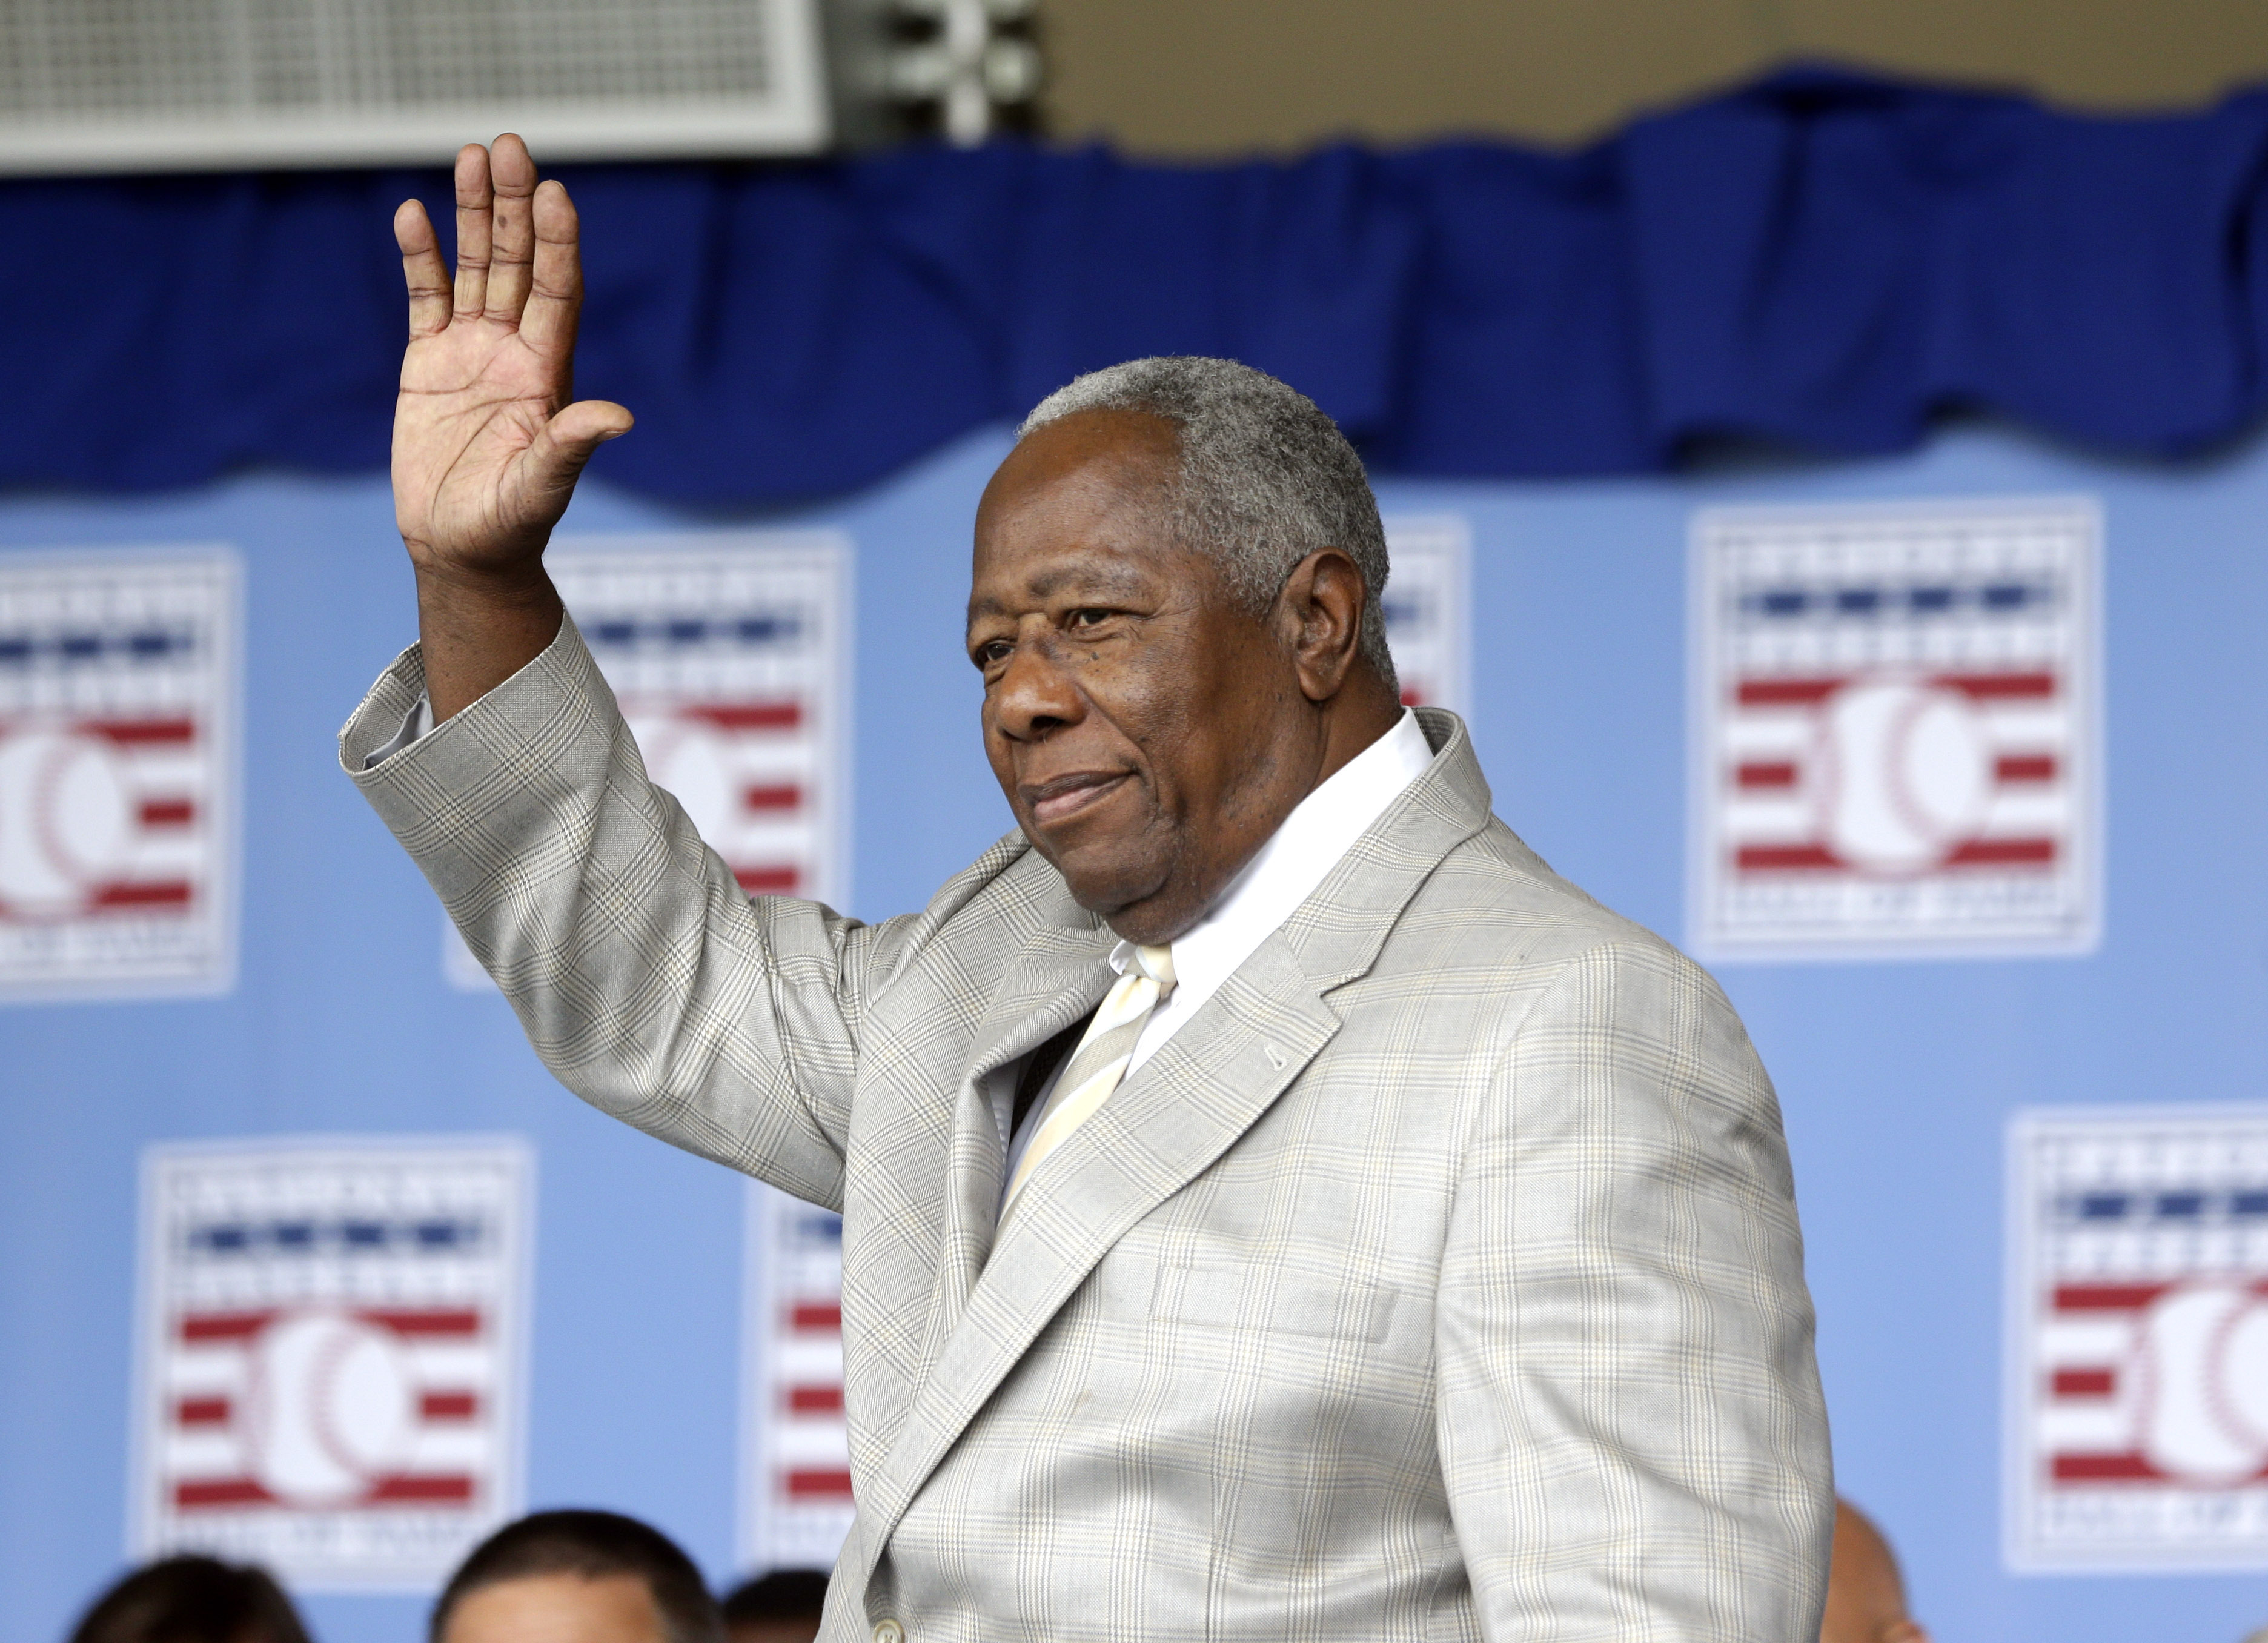 Georgia Today: The Struggle And Triumph Of Henry 'Hank' Aaron